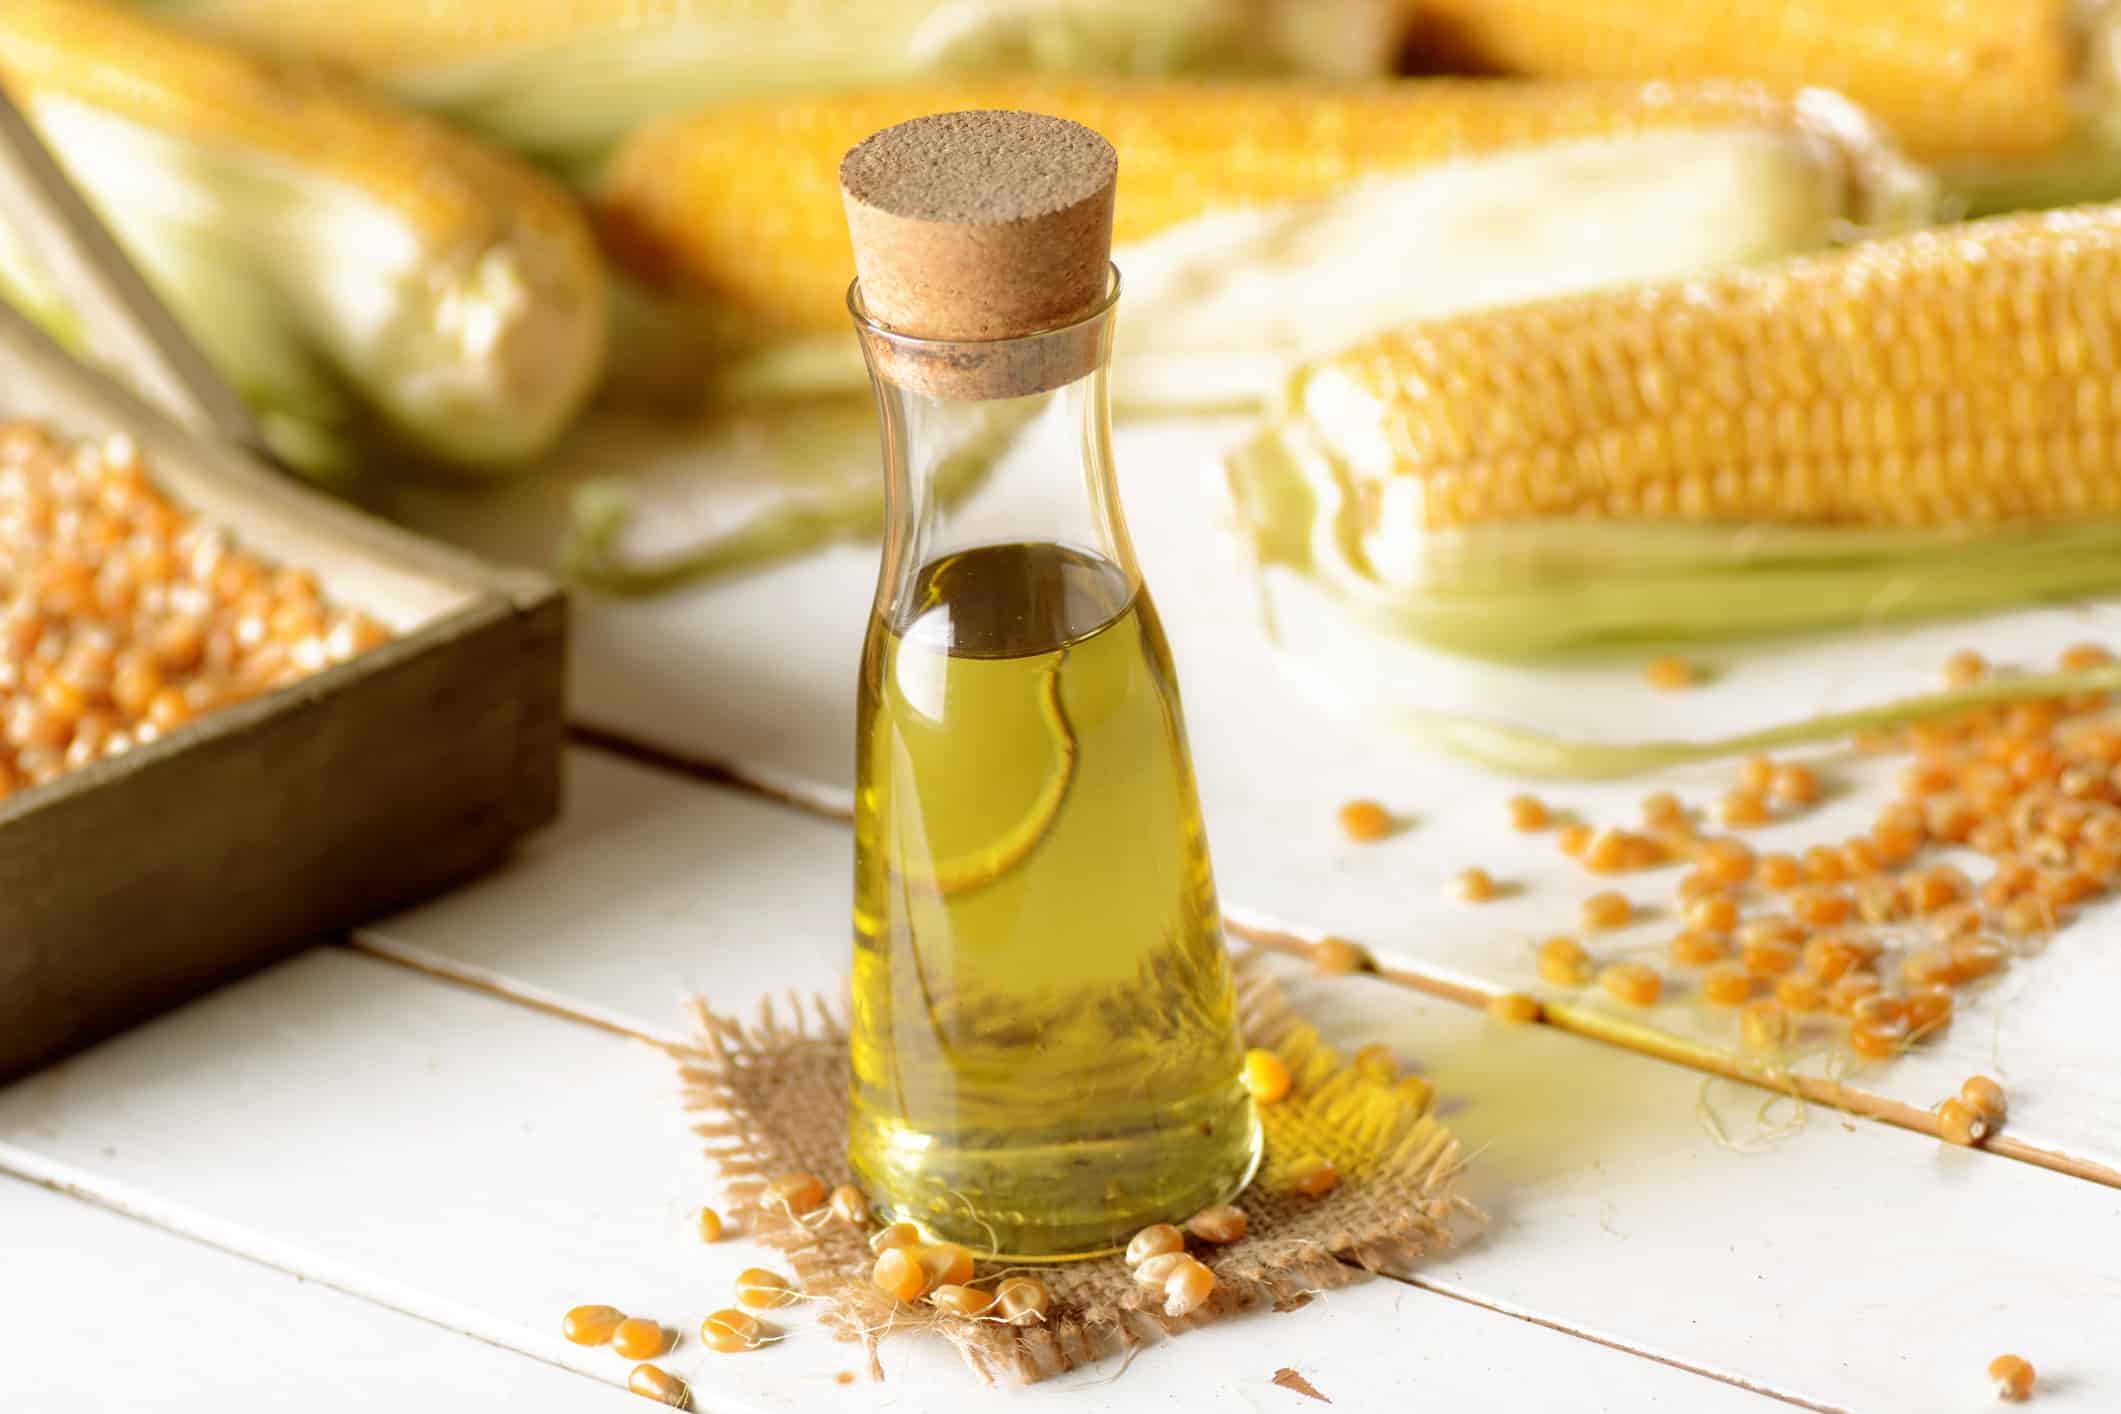 What are the benefits to using vegetable oil on your hair? - Quora